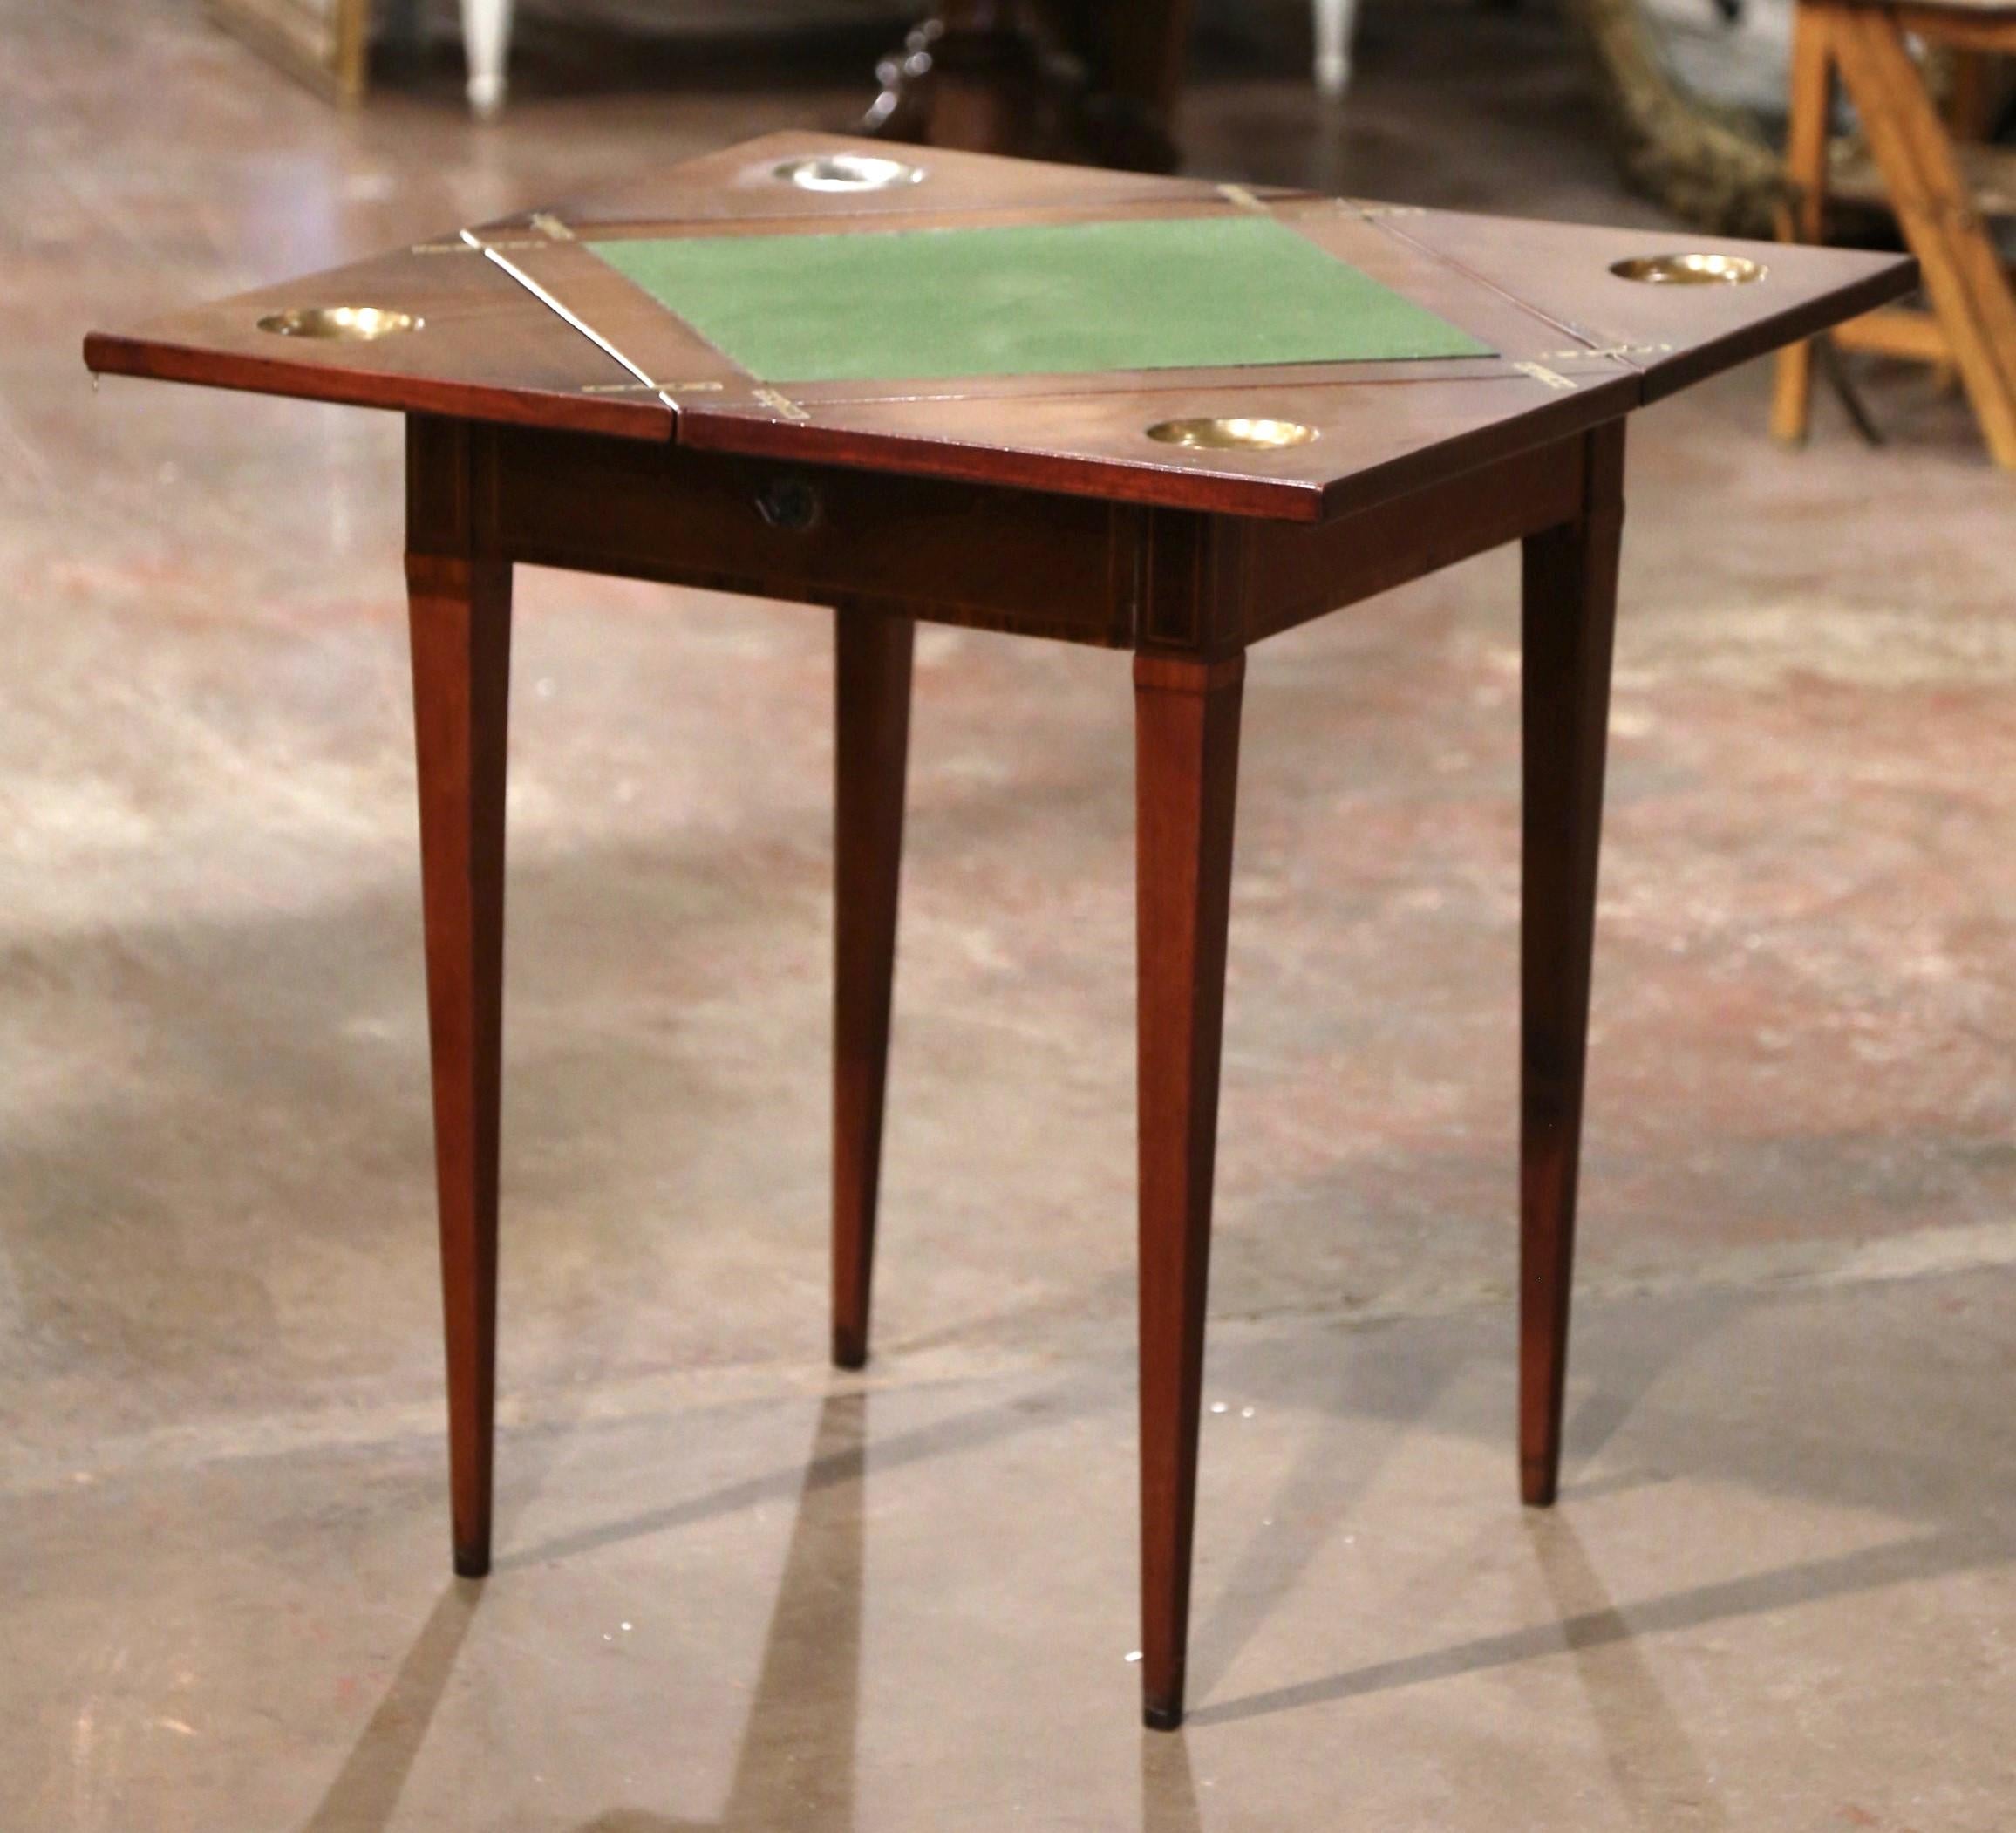 Decorate a game room or a den with this elegant folding card table. Crafted in France circa 1930 and built of mahogany wood, the square table stands on tapered legs, and dressed with a single drawer with chip storage compartments inside; the table